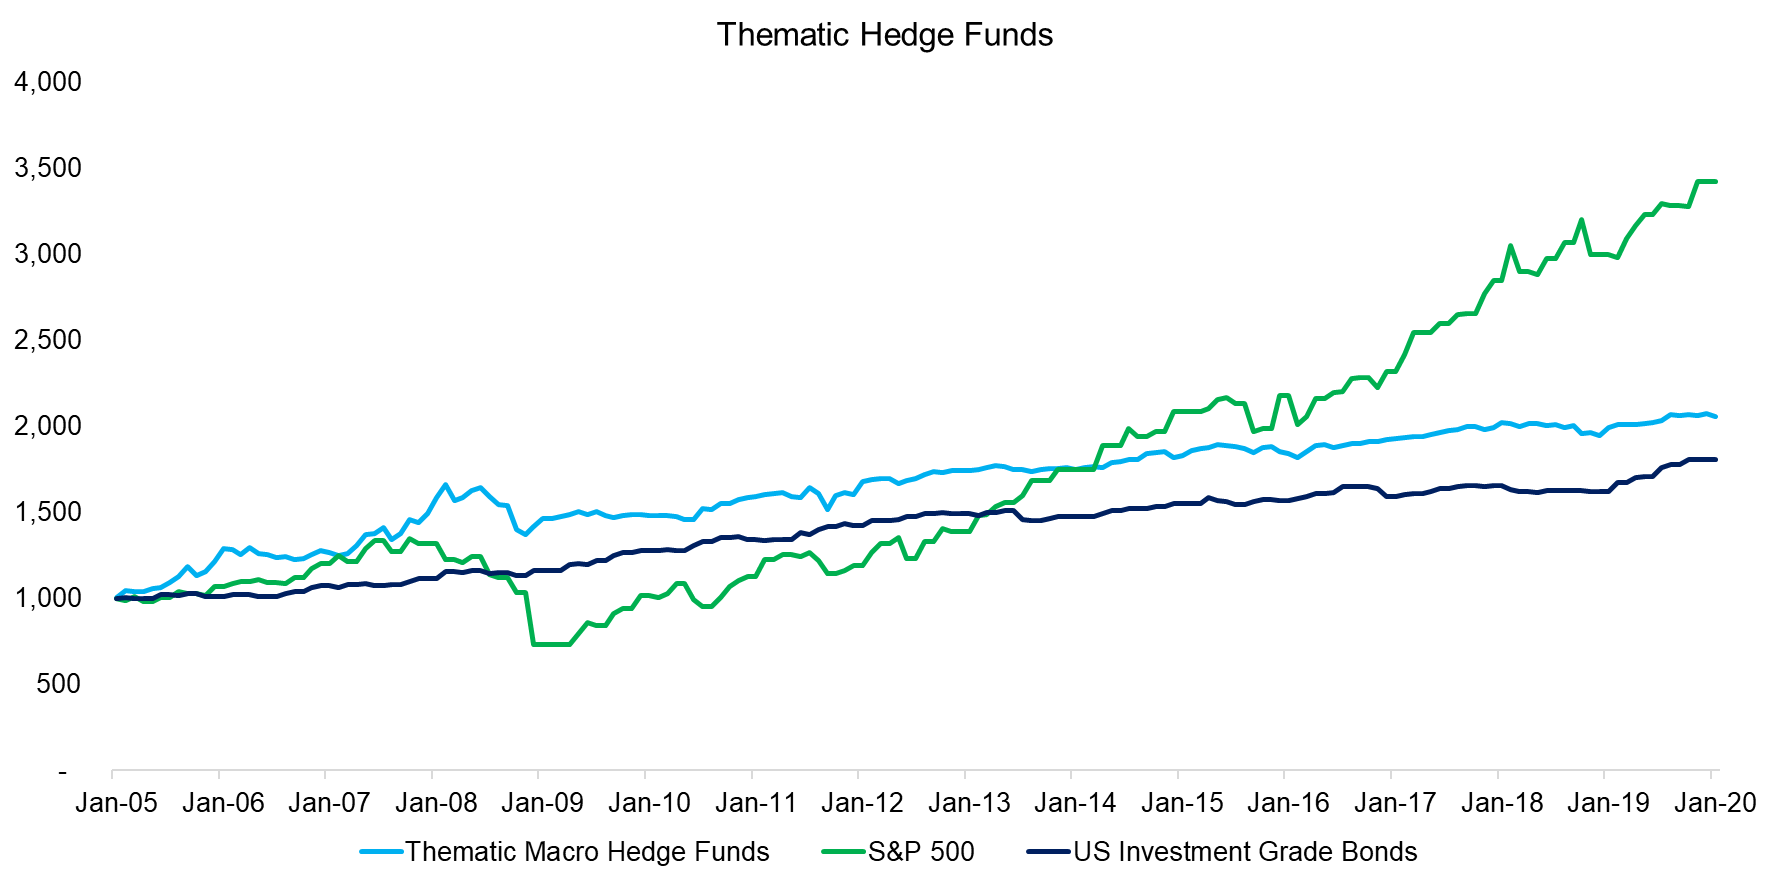 Thematic Hedge Funds